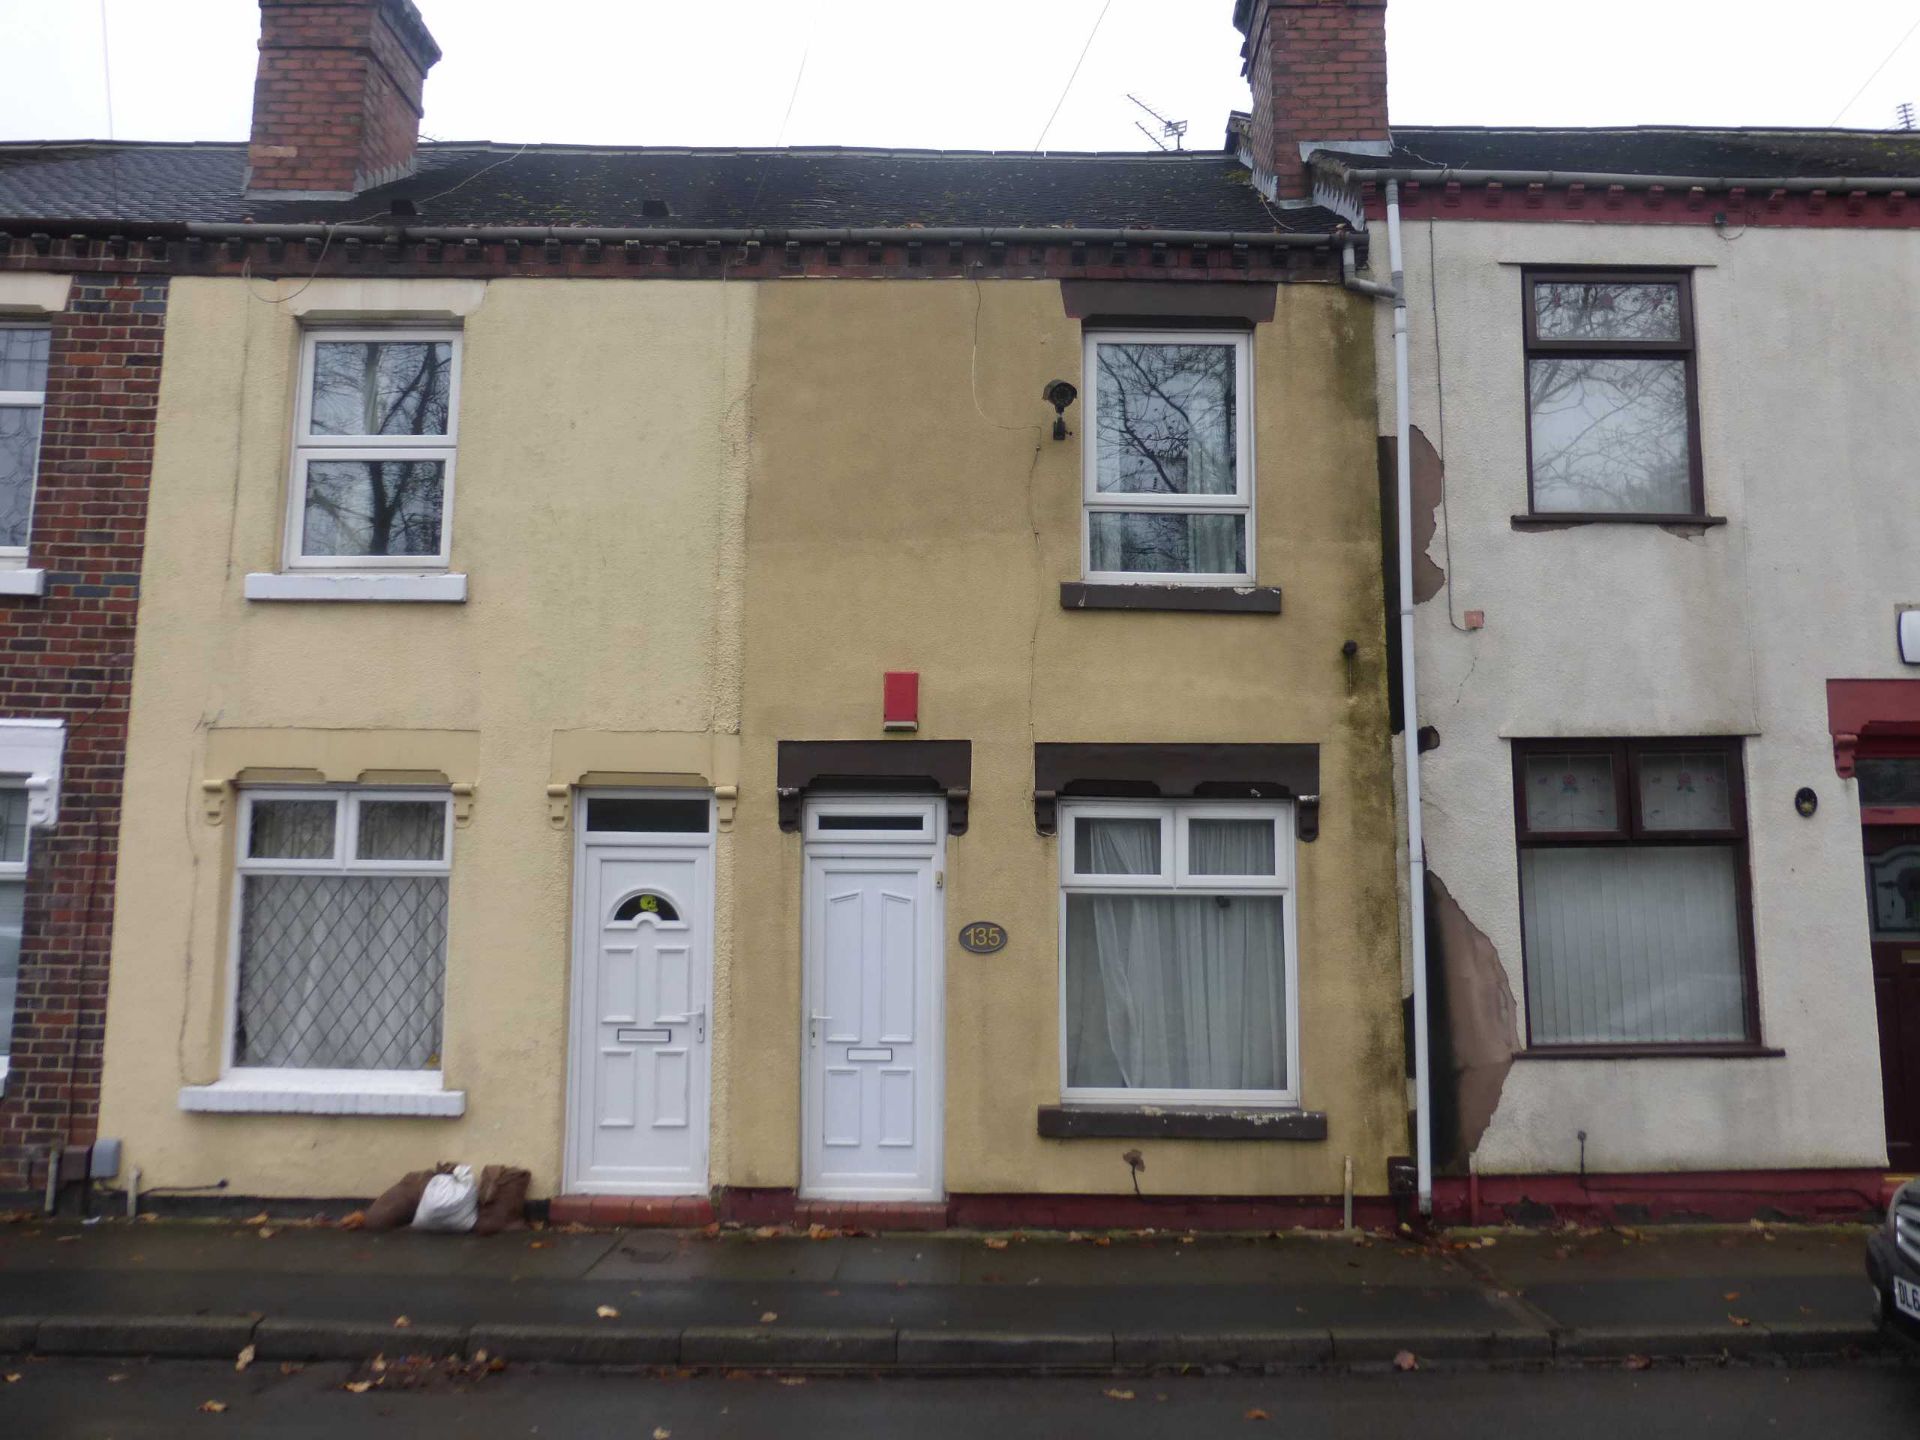 135 Sneyd Street, Sneyd Green, Stoke-on-Trent, Staffordshire, ST6 2NY
 
Mid terraced house
Two